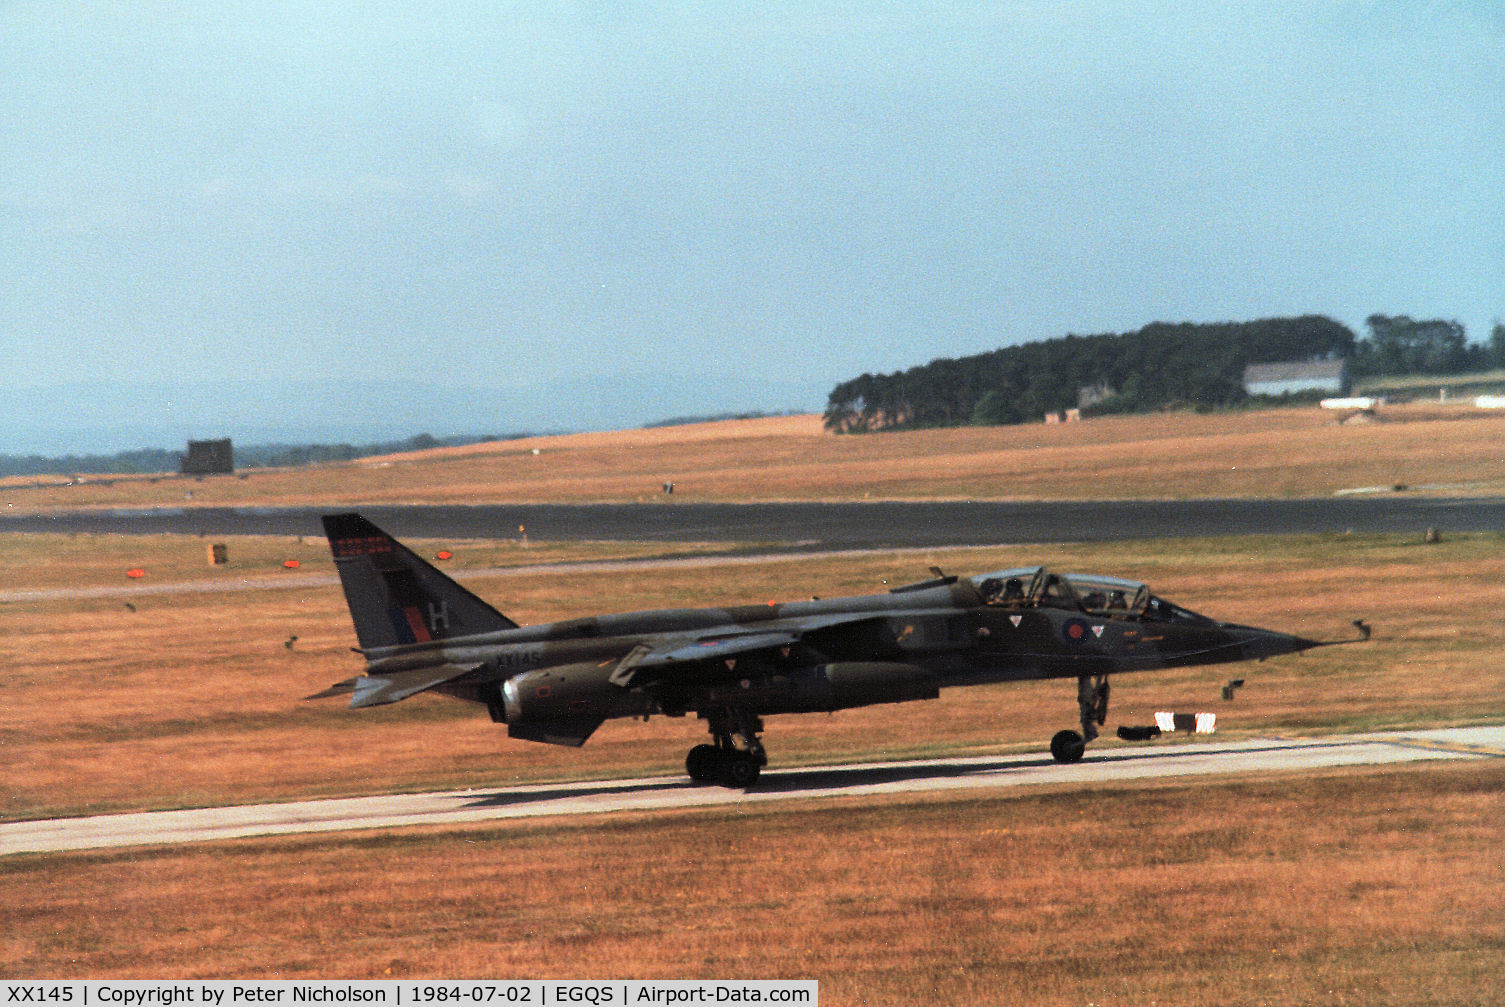 XX145, 1974 Sepecat Jaguar T.2 C/N B.10, Jaguar T.2 of 226 Operational Conversion Unit joining the active runway at RAF Lossiemouth in the Summer of 1984, ten years after first arriving there with the Unit